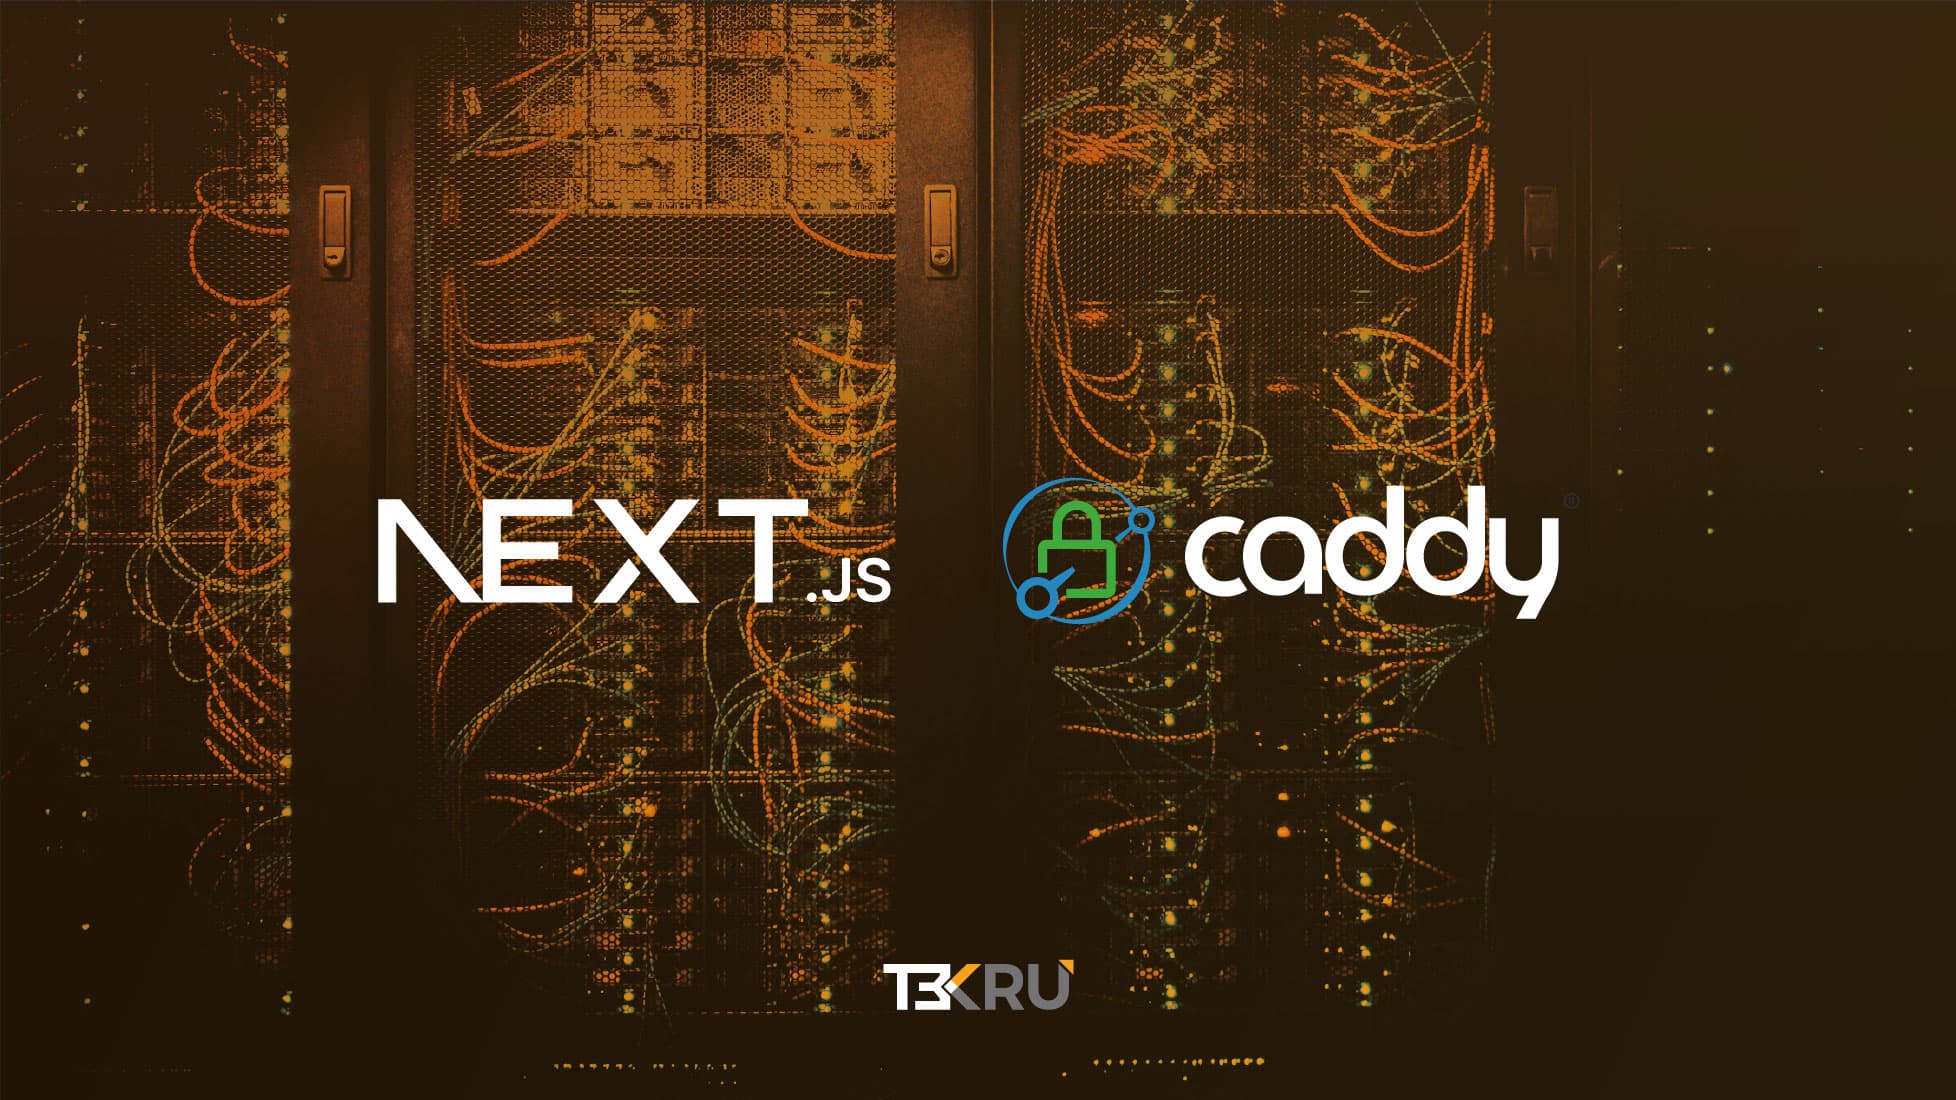 Deploy a Next.js app with Caddy